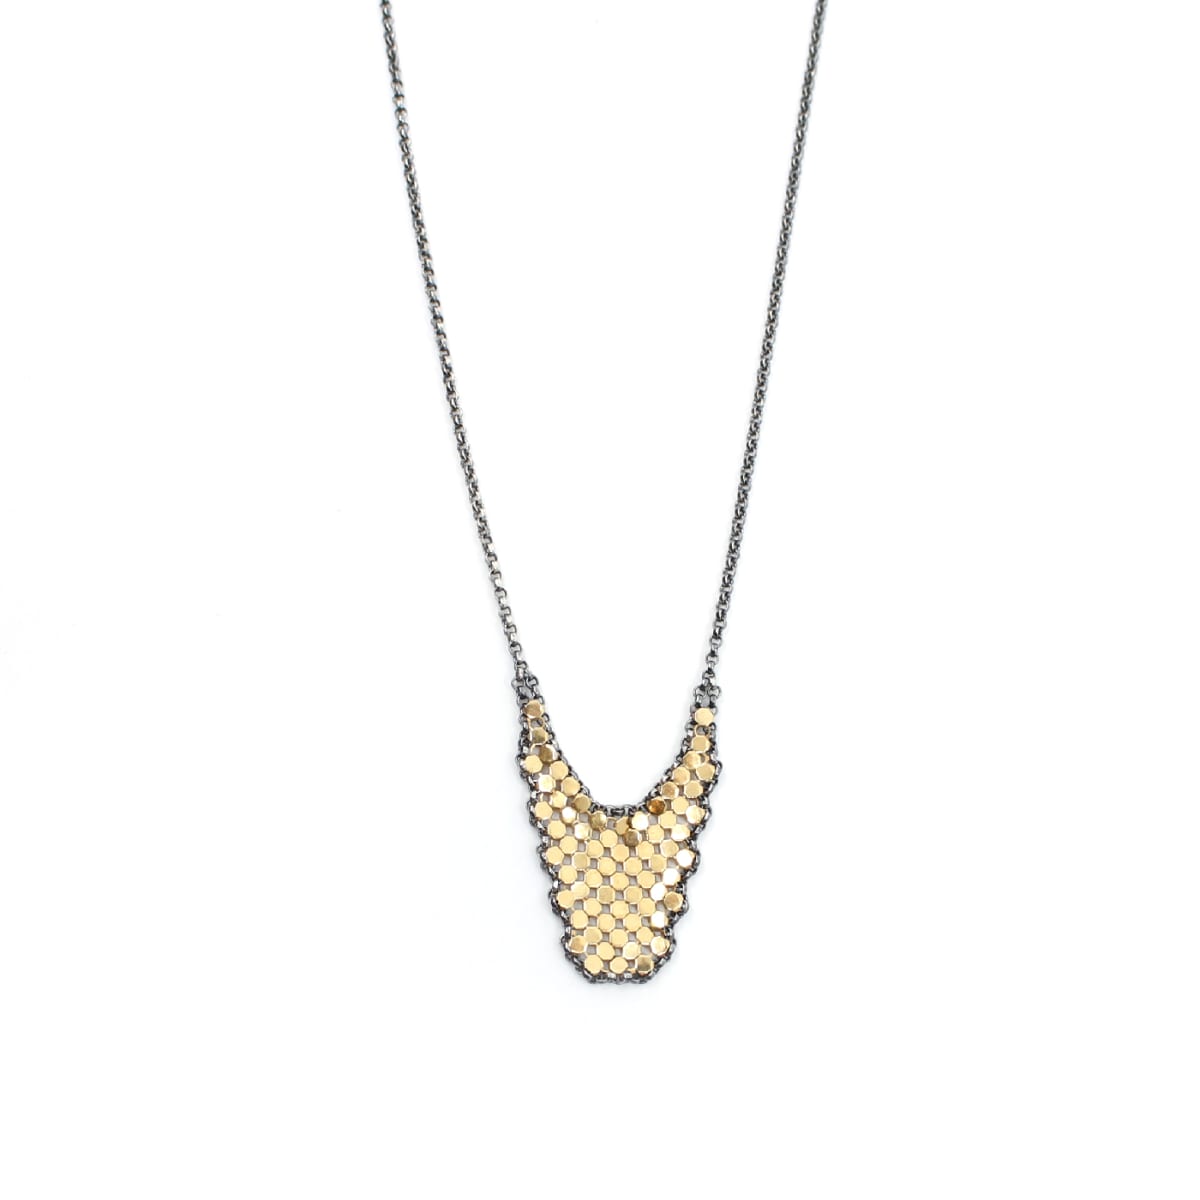 LARGE DRIP MESH NECKLACE by Maral Rapp  Image: gold plated brass mesh